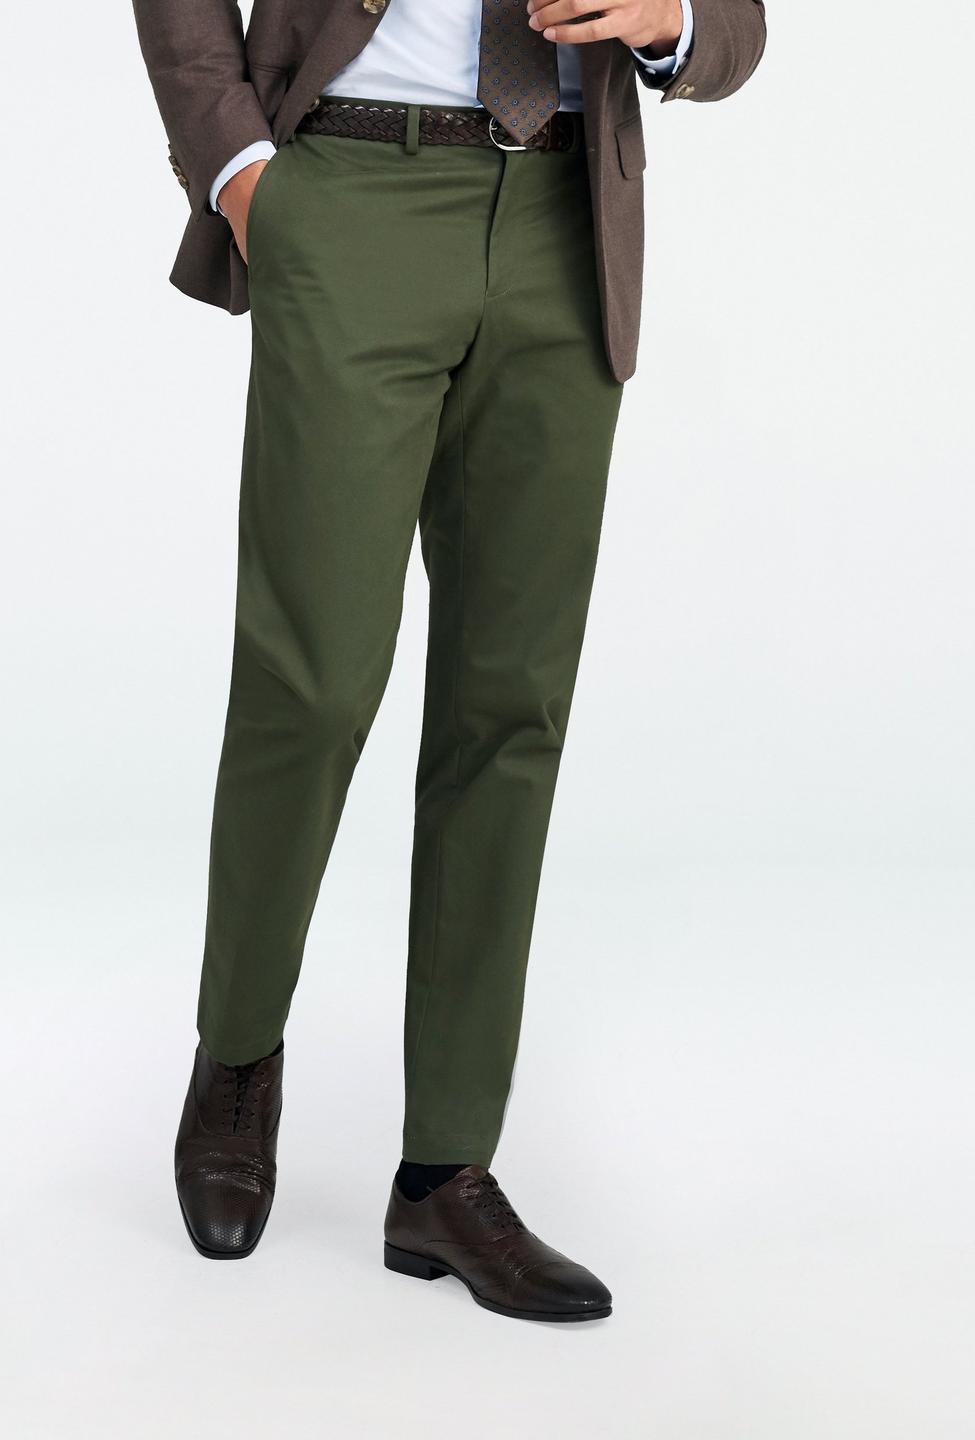 Green pants - Houndslow Solid Design from Premium Indochino Collection